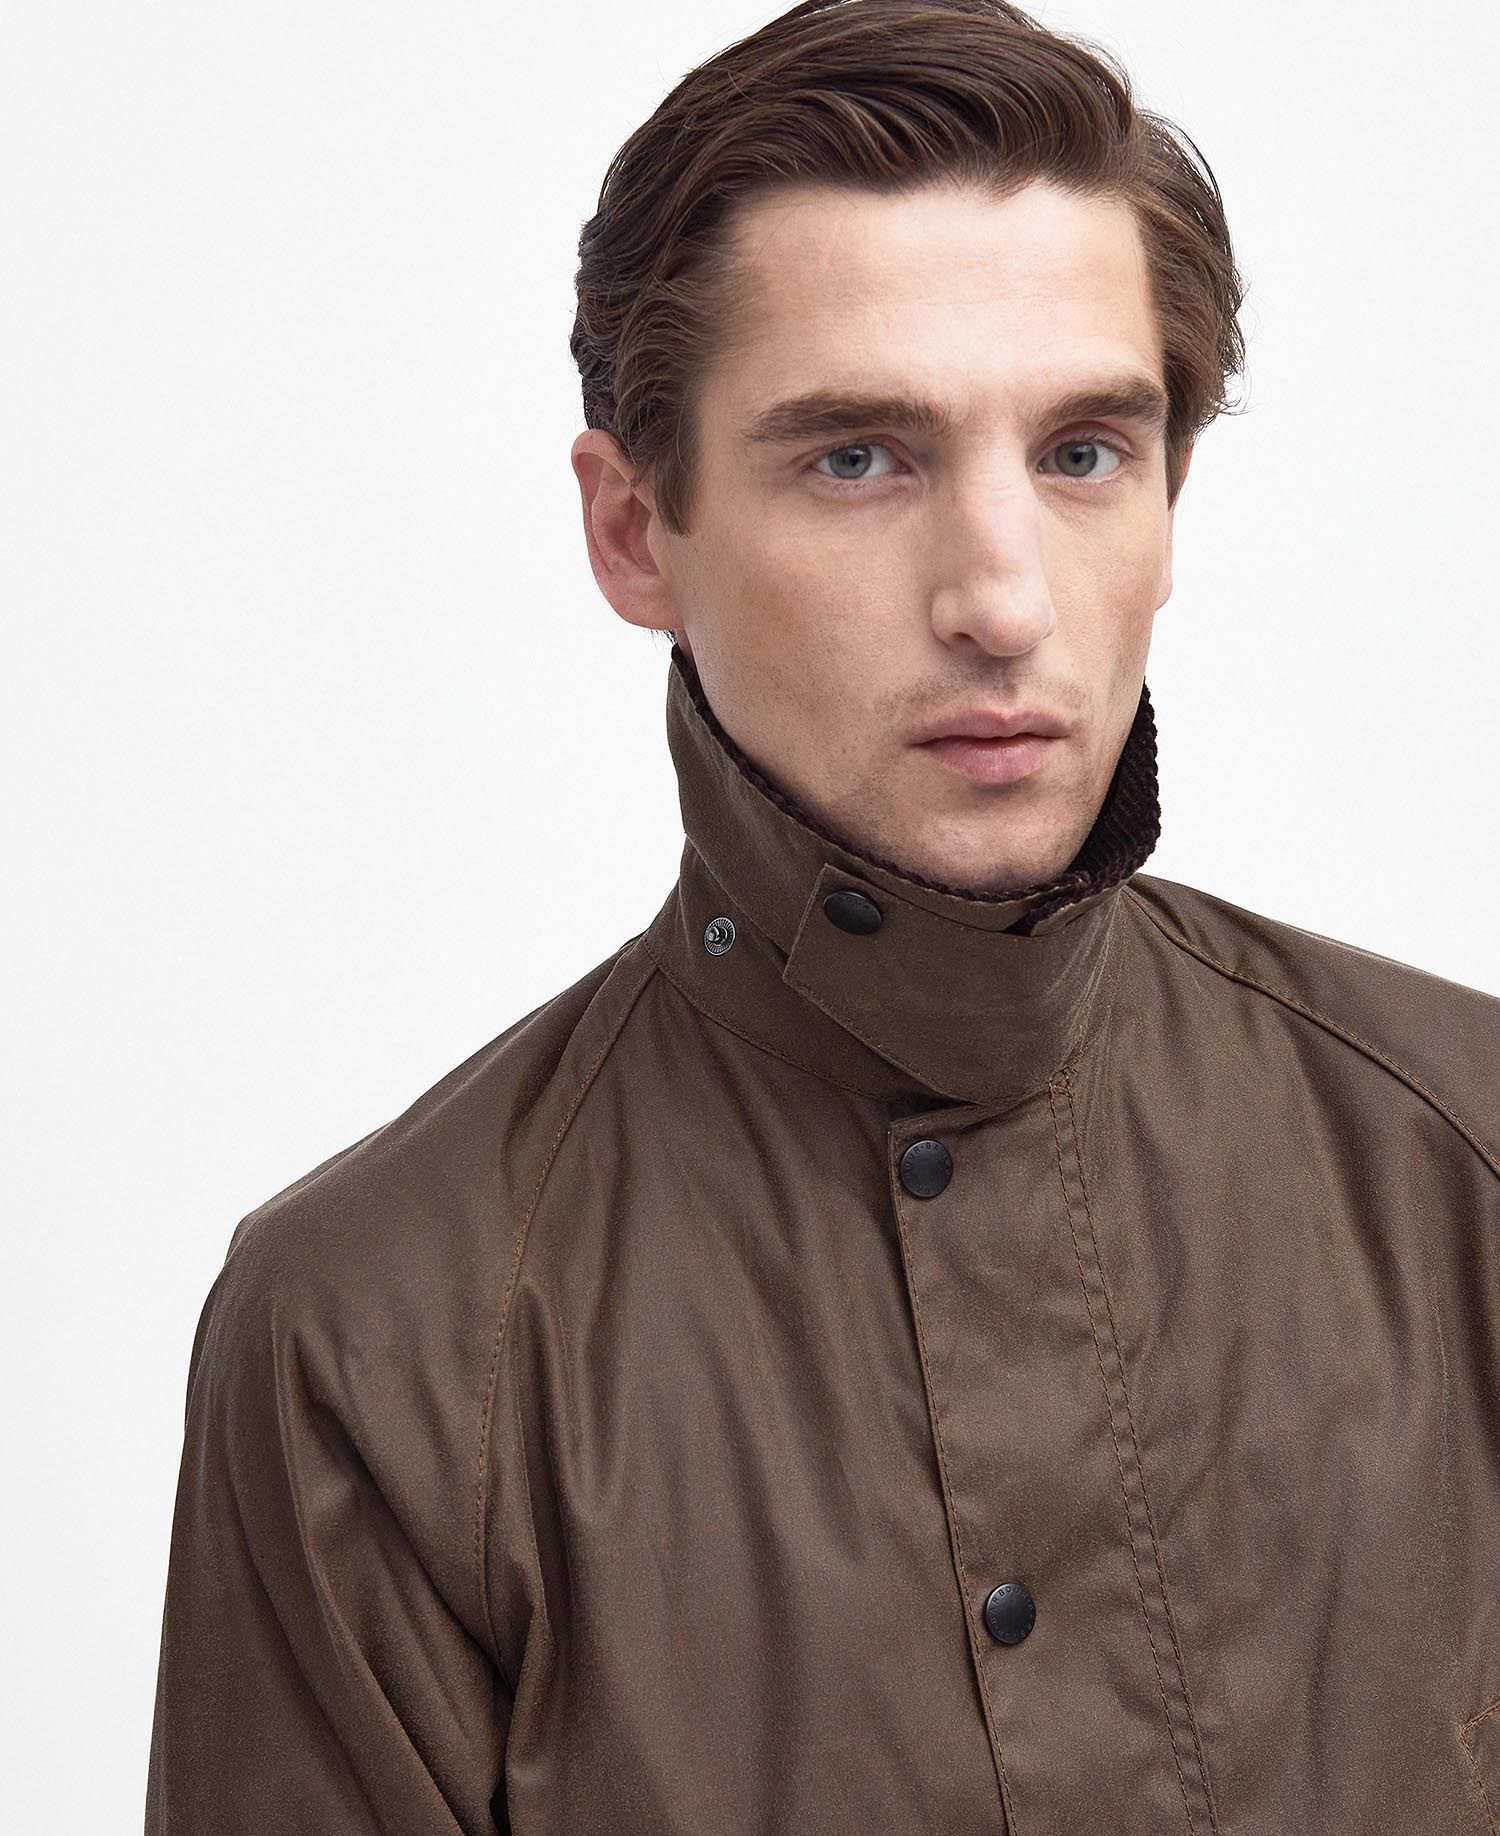 Shop the Bedale Wax Jacket today. | Barbour